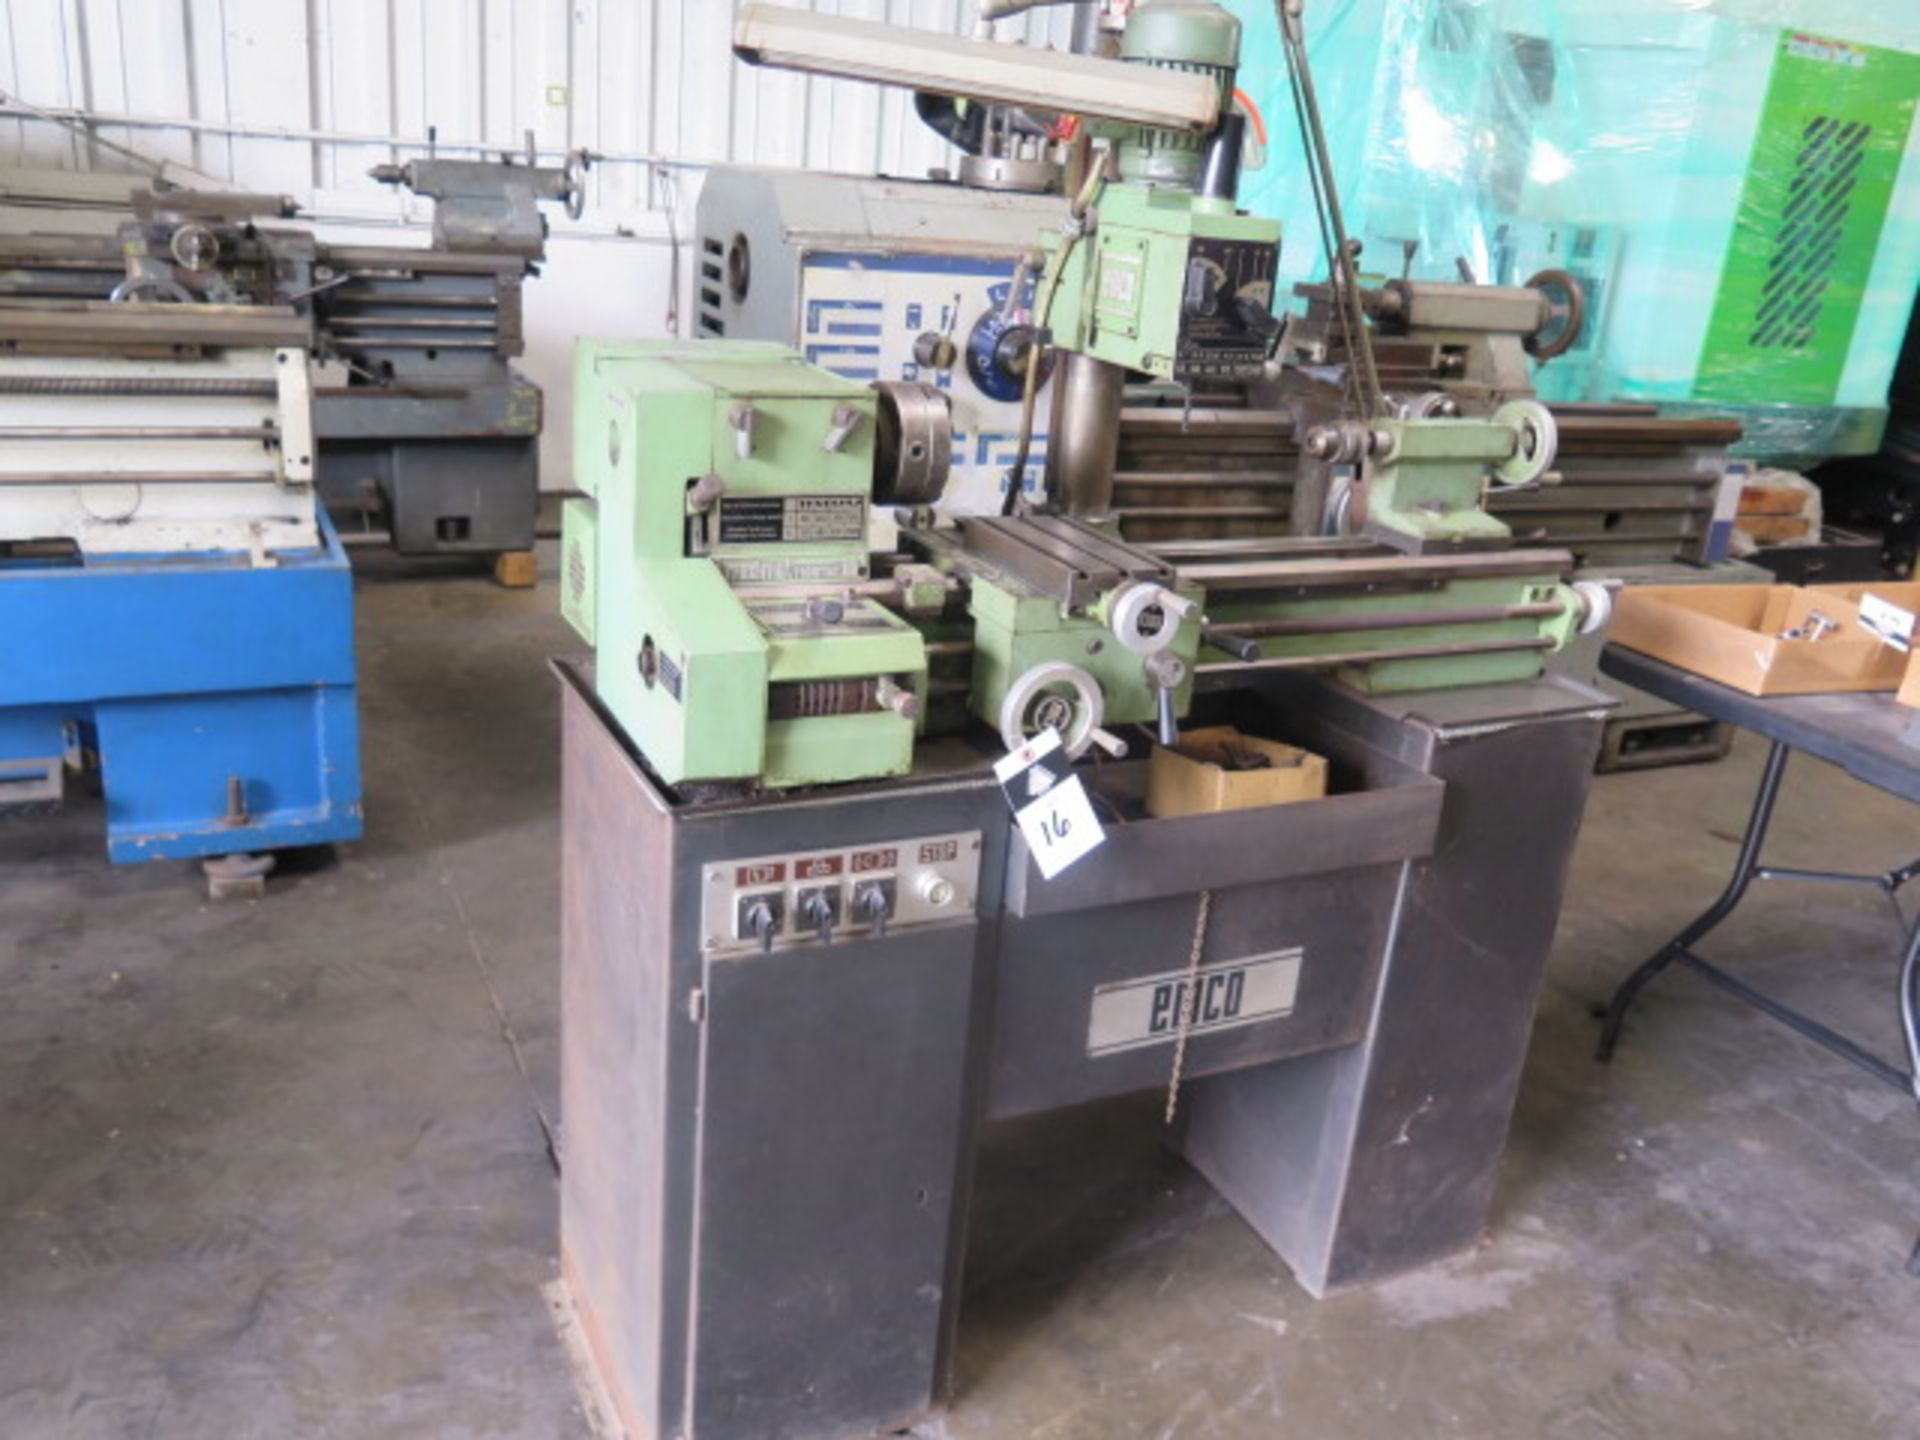 Emco “Maximat Mentor 10” Mill / Drill Machine w/ 60-2500 RPM (SOLD AS-IS - NO WARRANTY) - Image 2 of 16